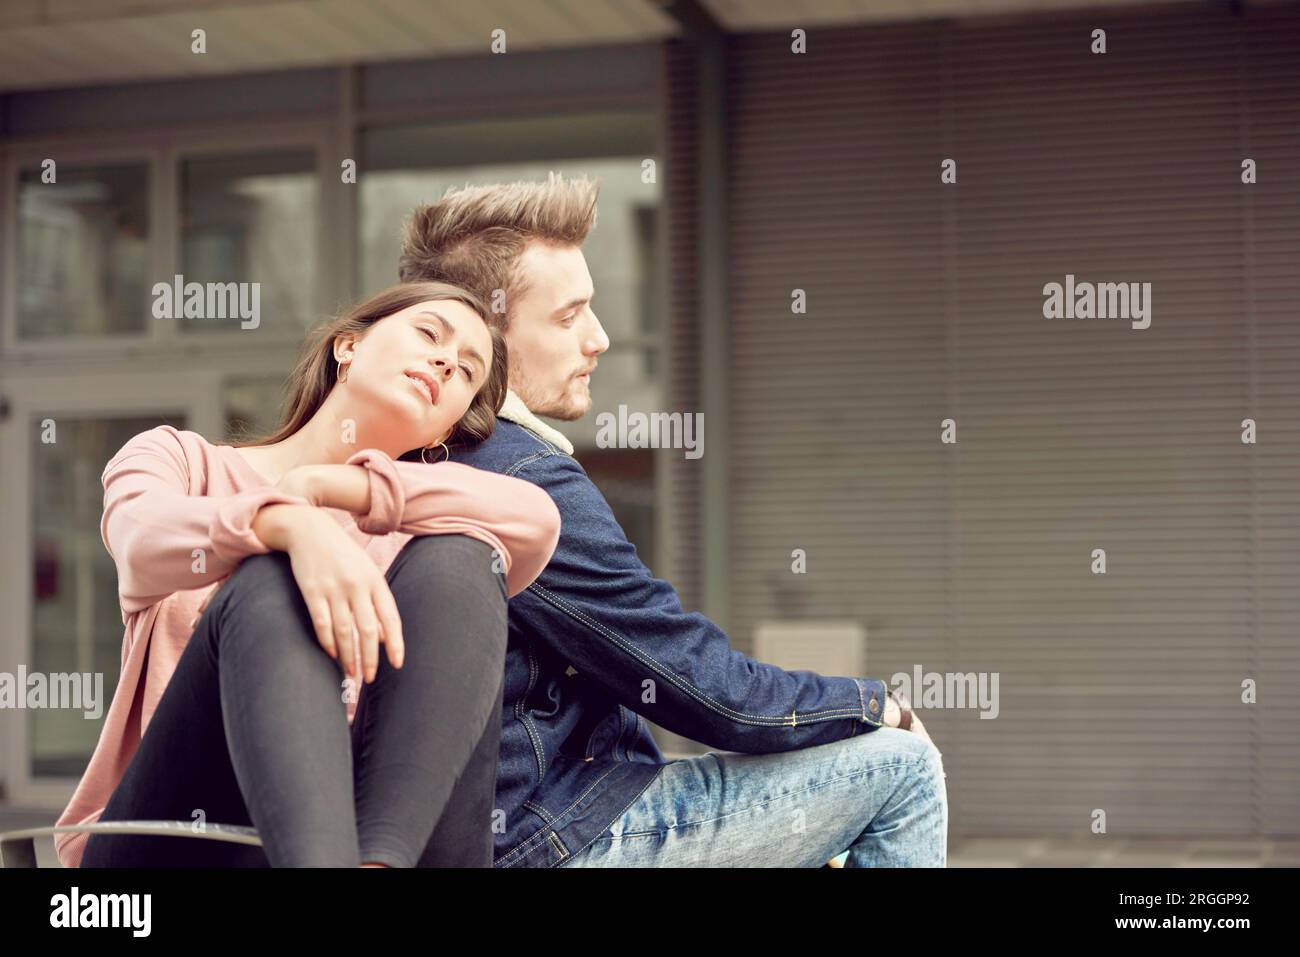 Teenage couple sitting together Banque D'Images